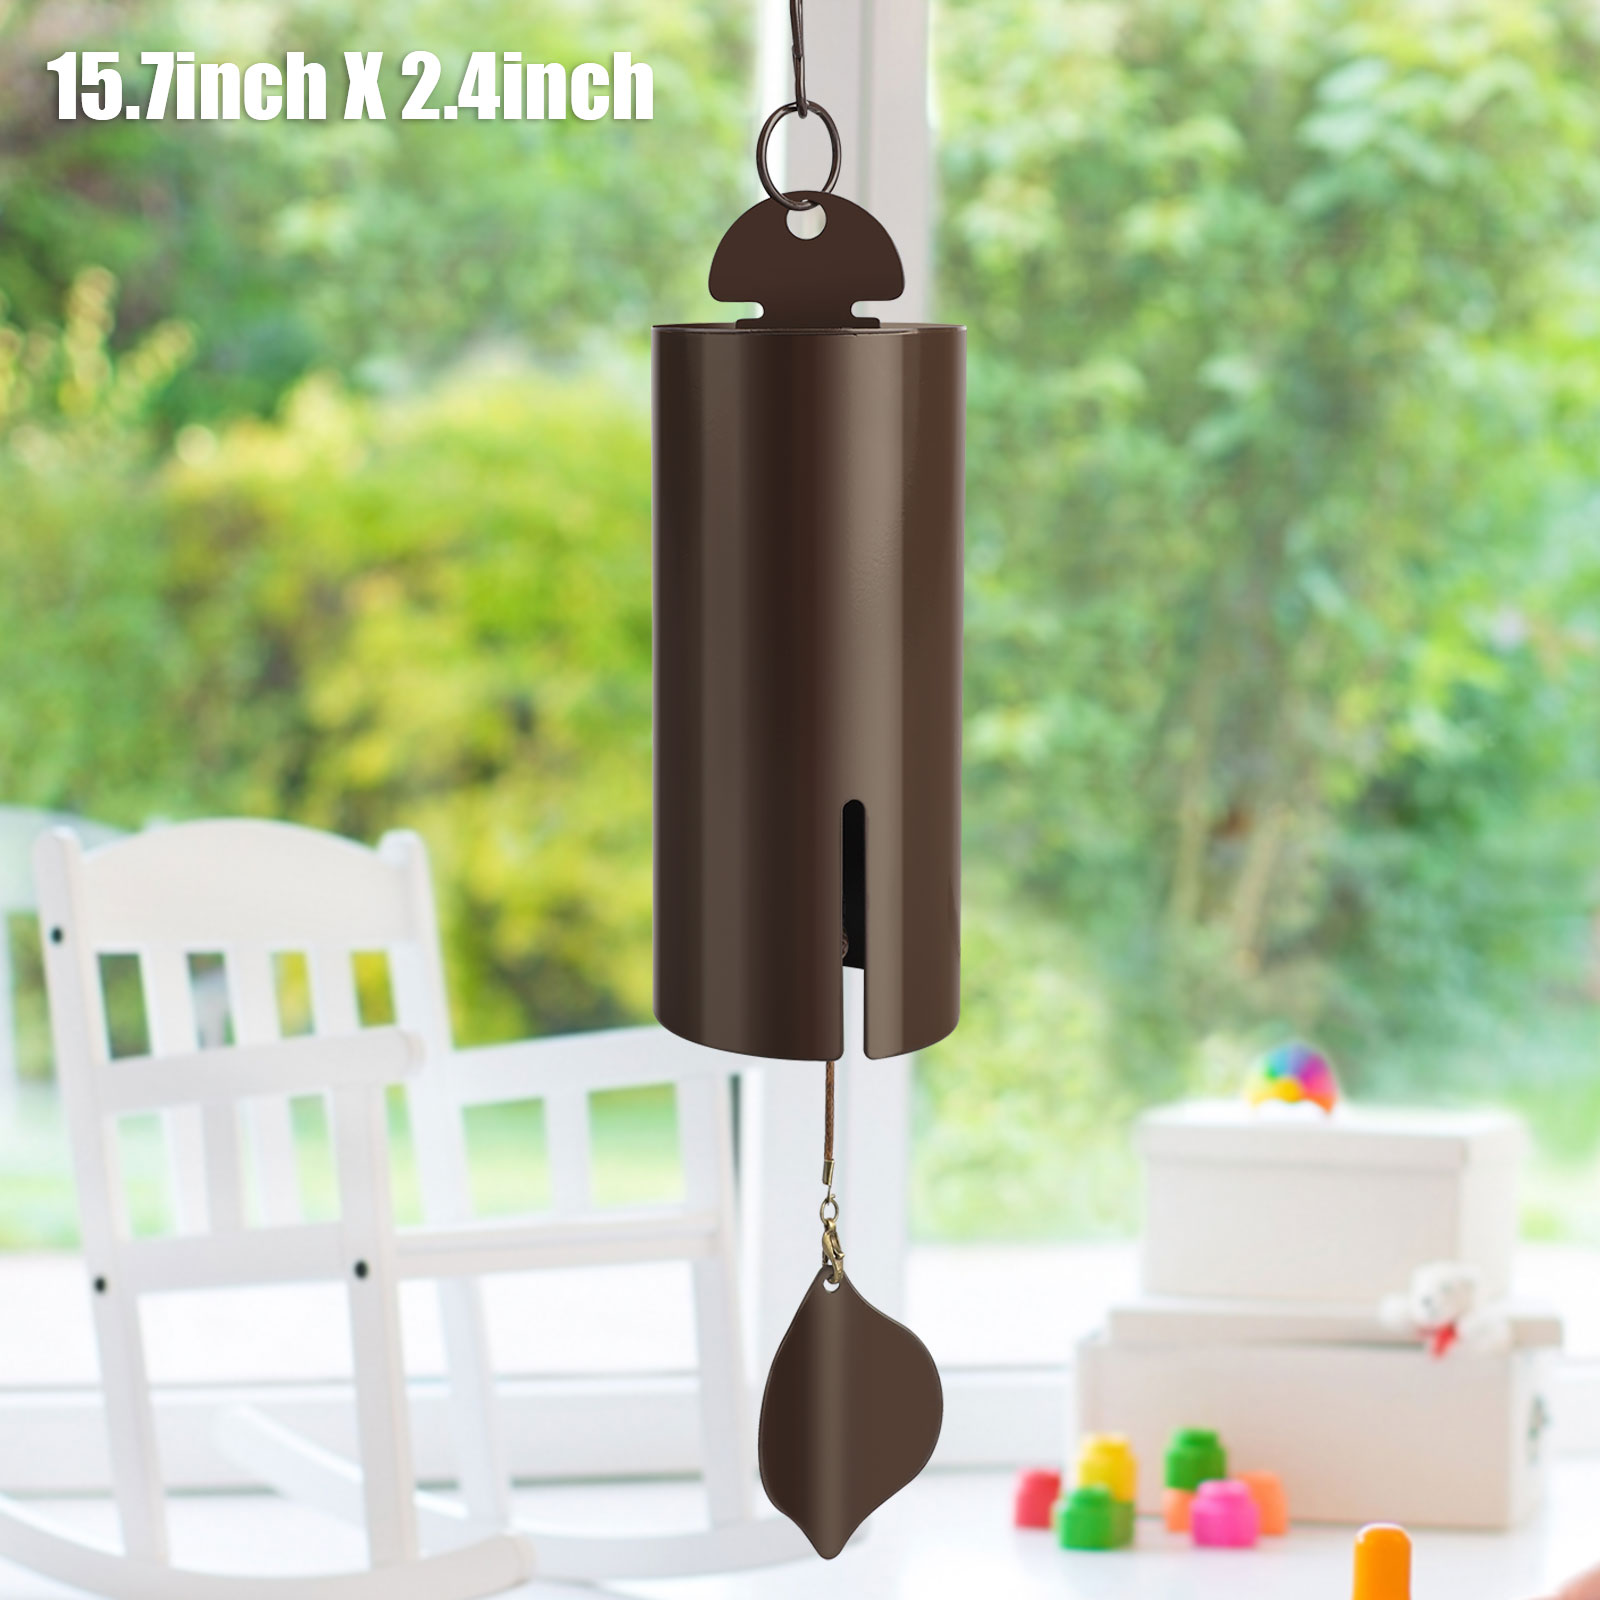 thumbnail 13  - Large Deep Resonance Serenity Metal Bell Heroic Wind Chimes Outdoor Home Decor